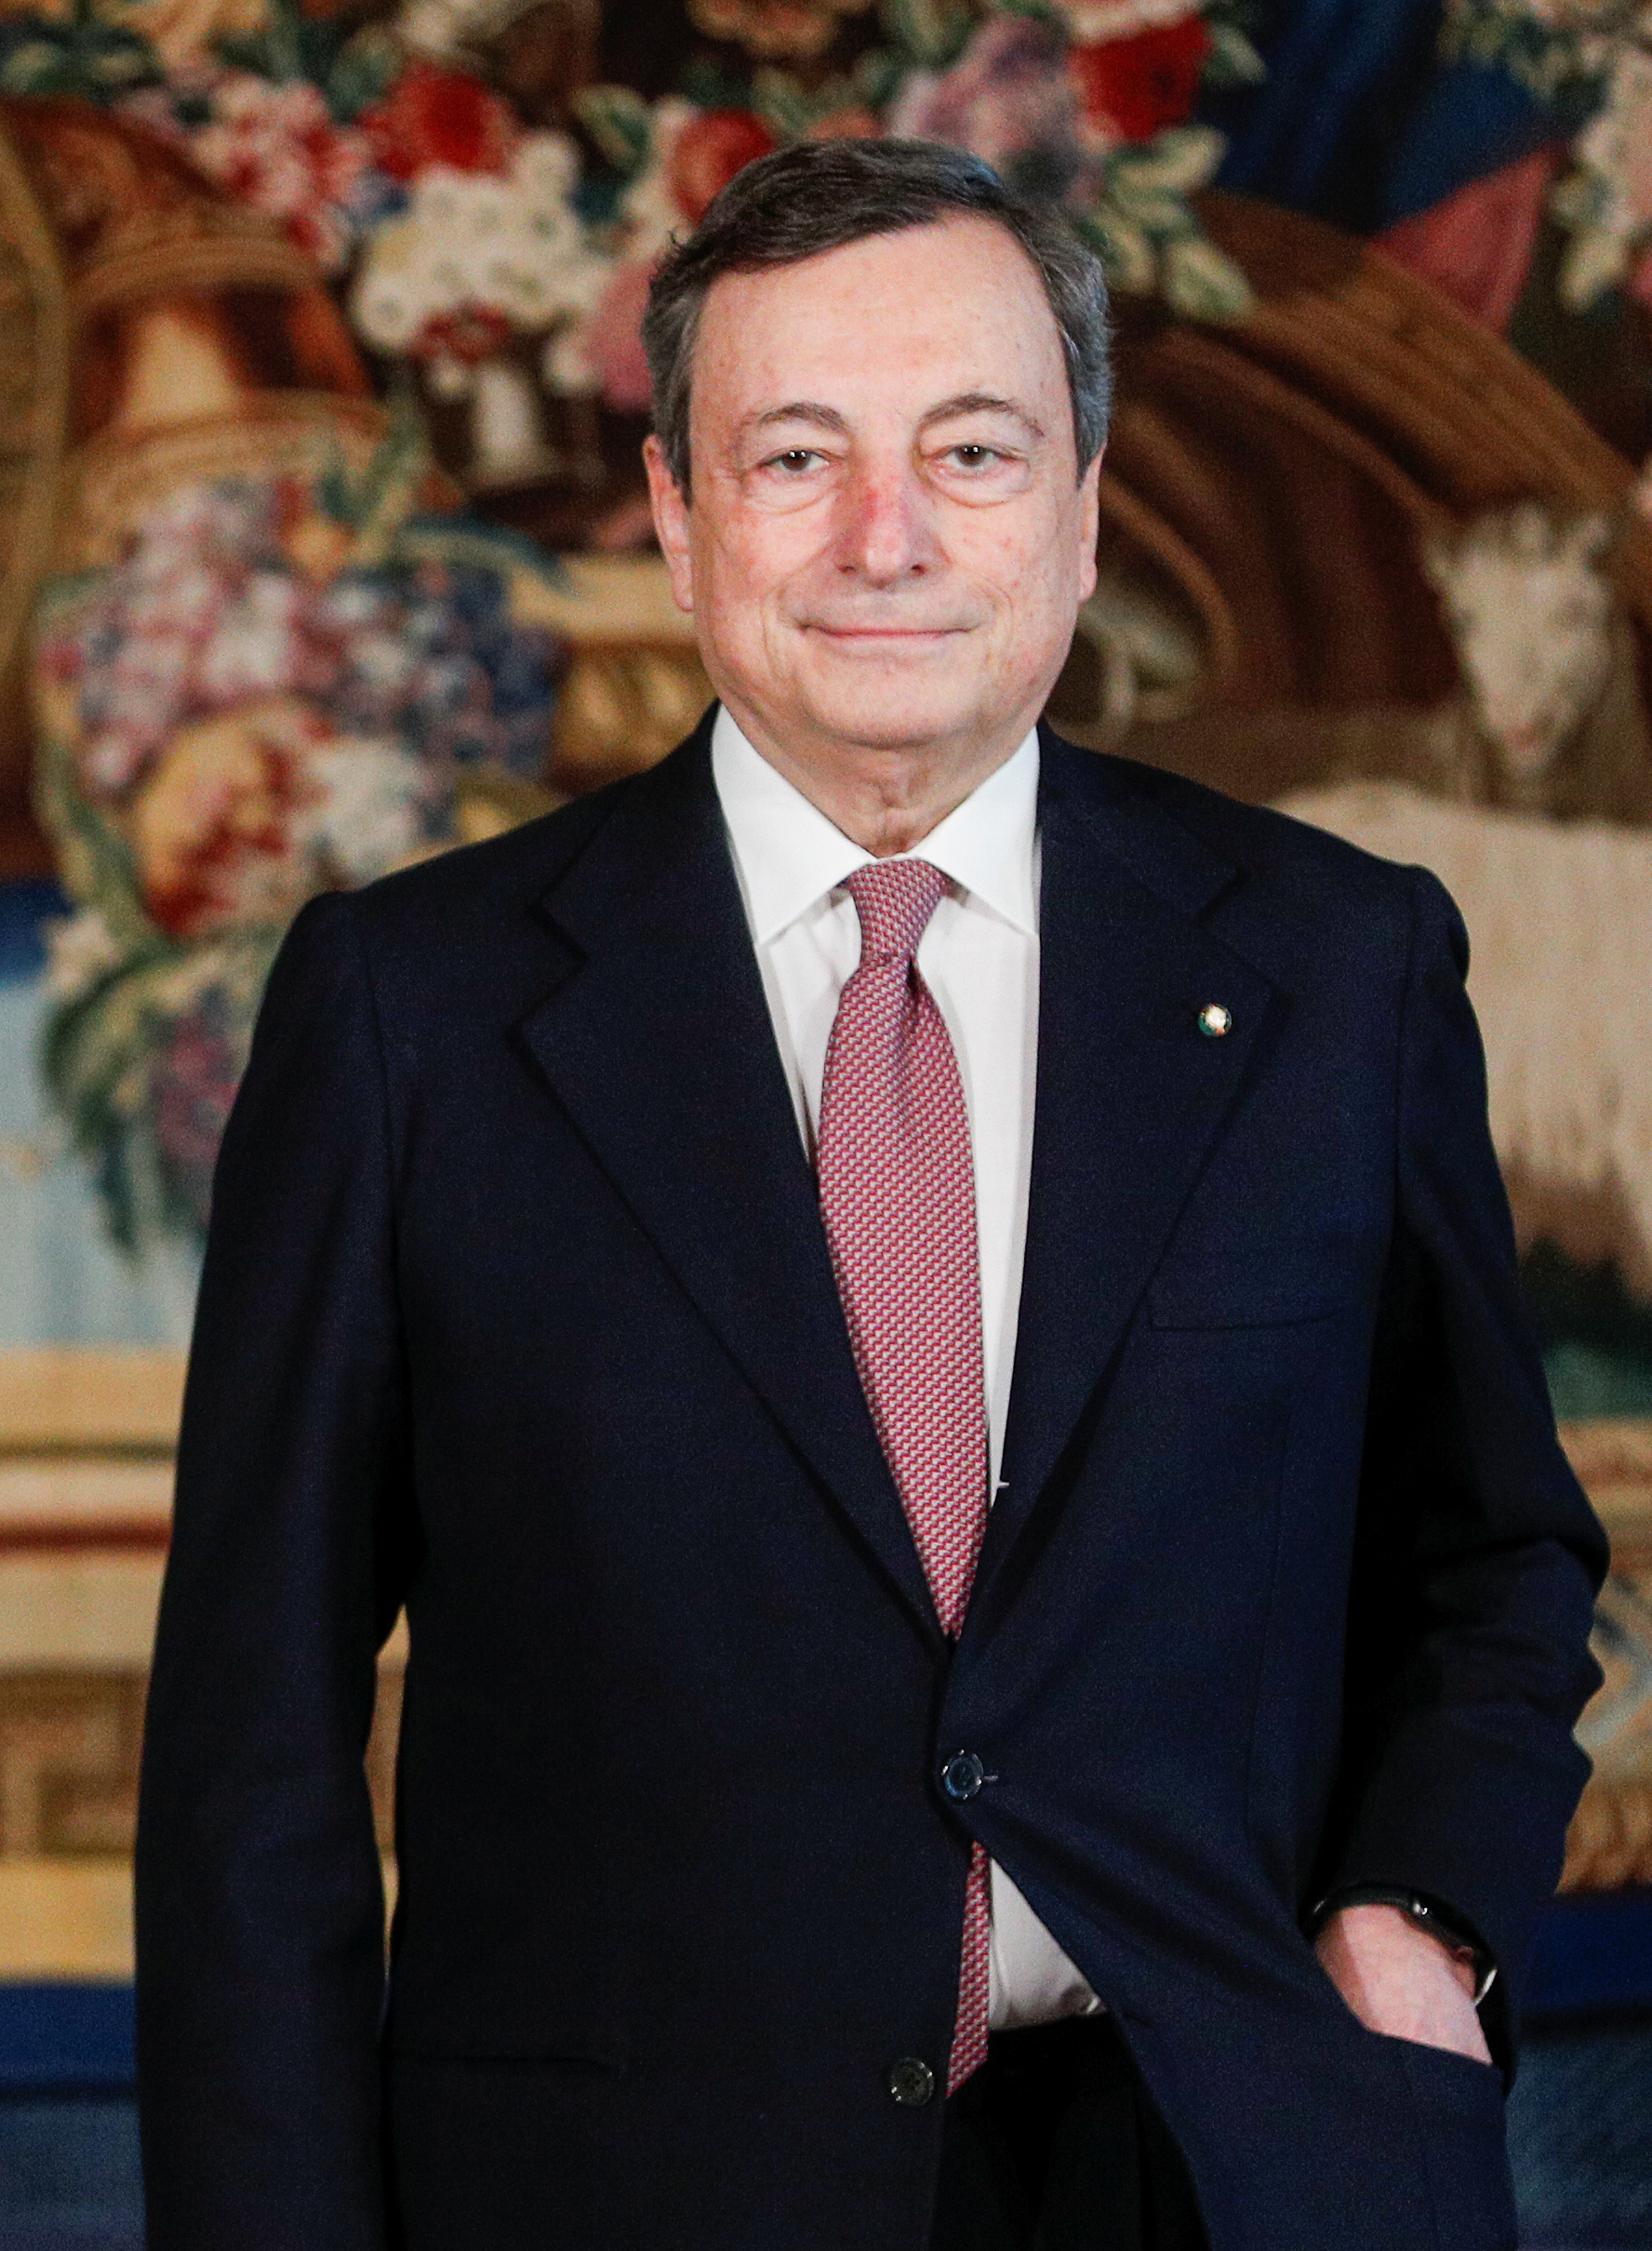 Prime Minister Mario Draghi poses for a picture after the new cabinet ministers swearing-in ceremony, at the Quirinale Presidential Palace in Rome, Italy, February 13, 2021. REUTERS/Guglielmo Mangiapane/Pool